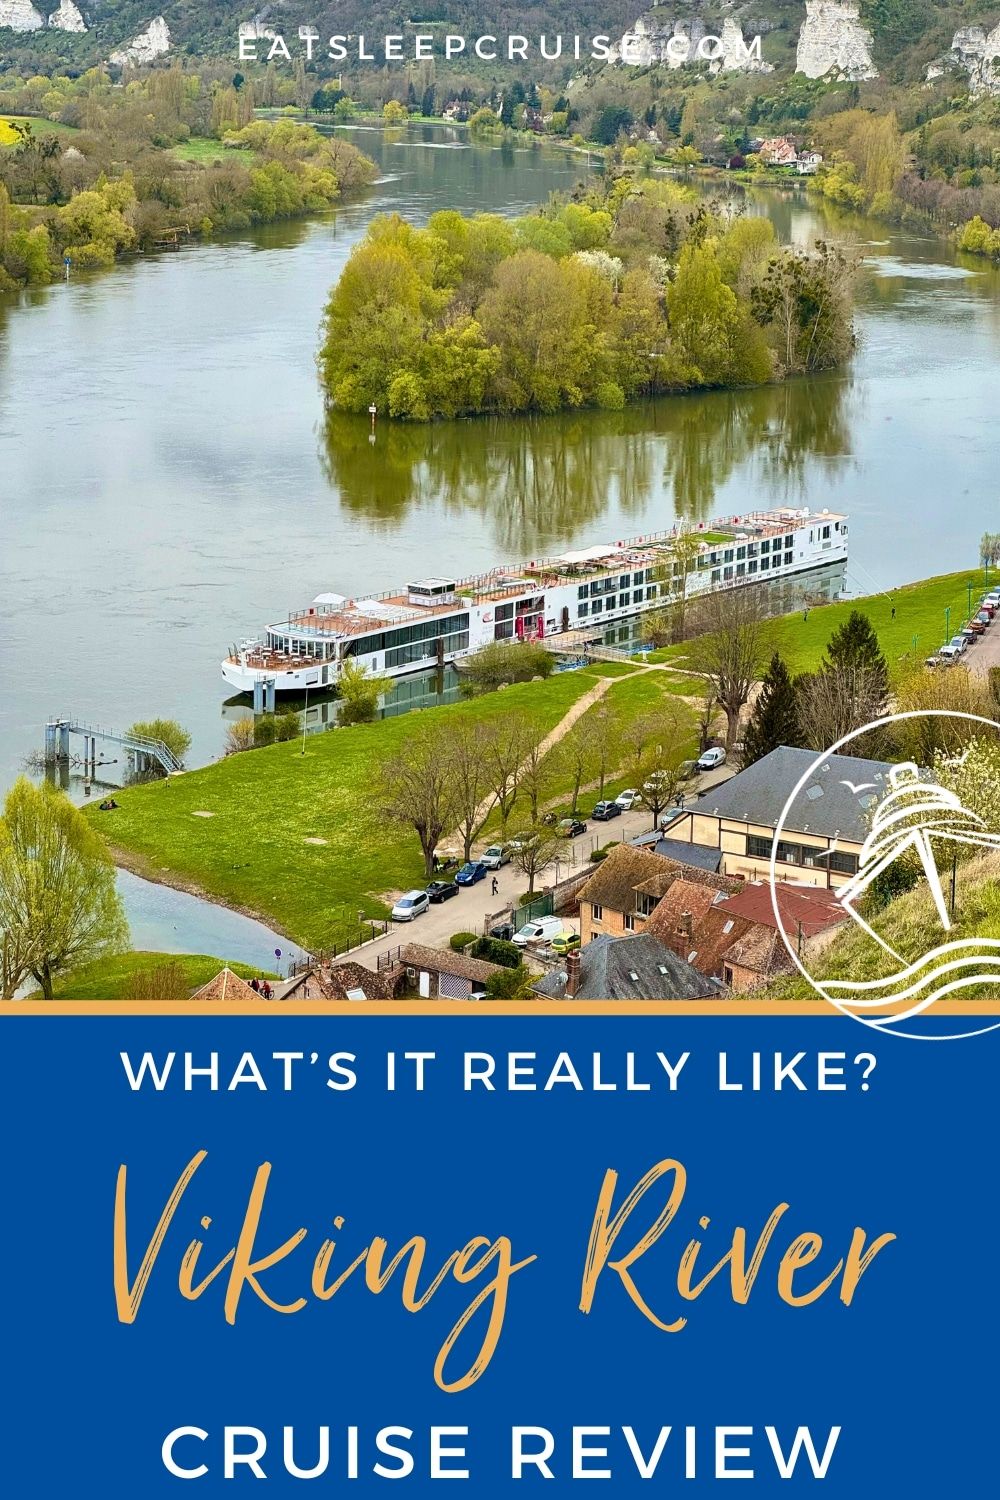 We Just Returned From Our First Viking River Cruise And Here's What It Was Really Like